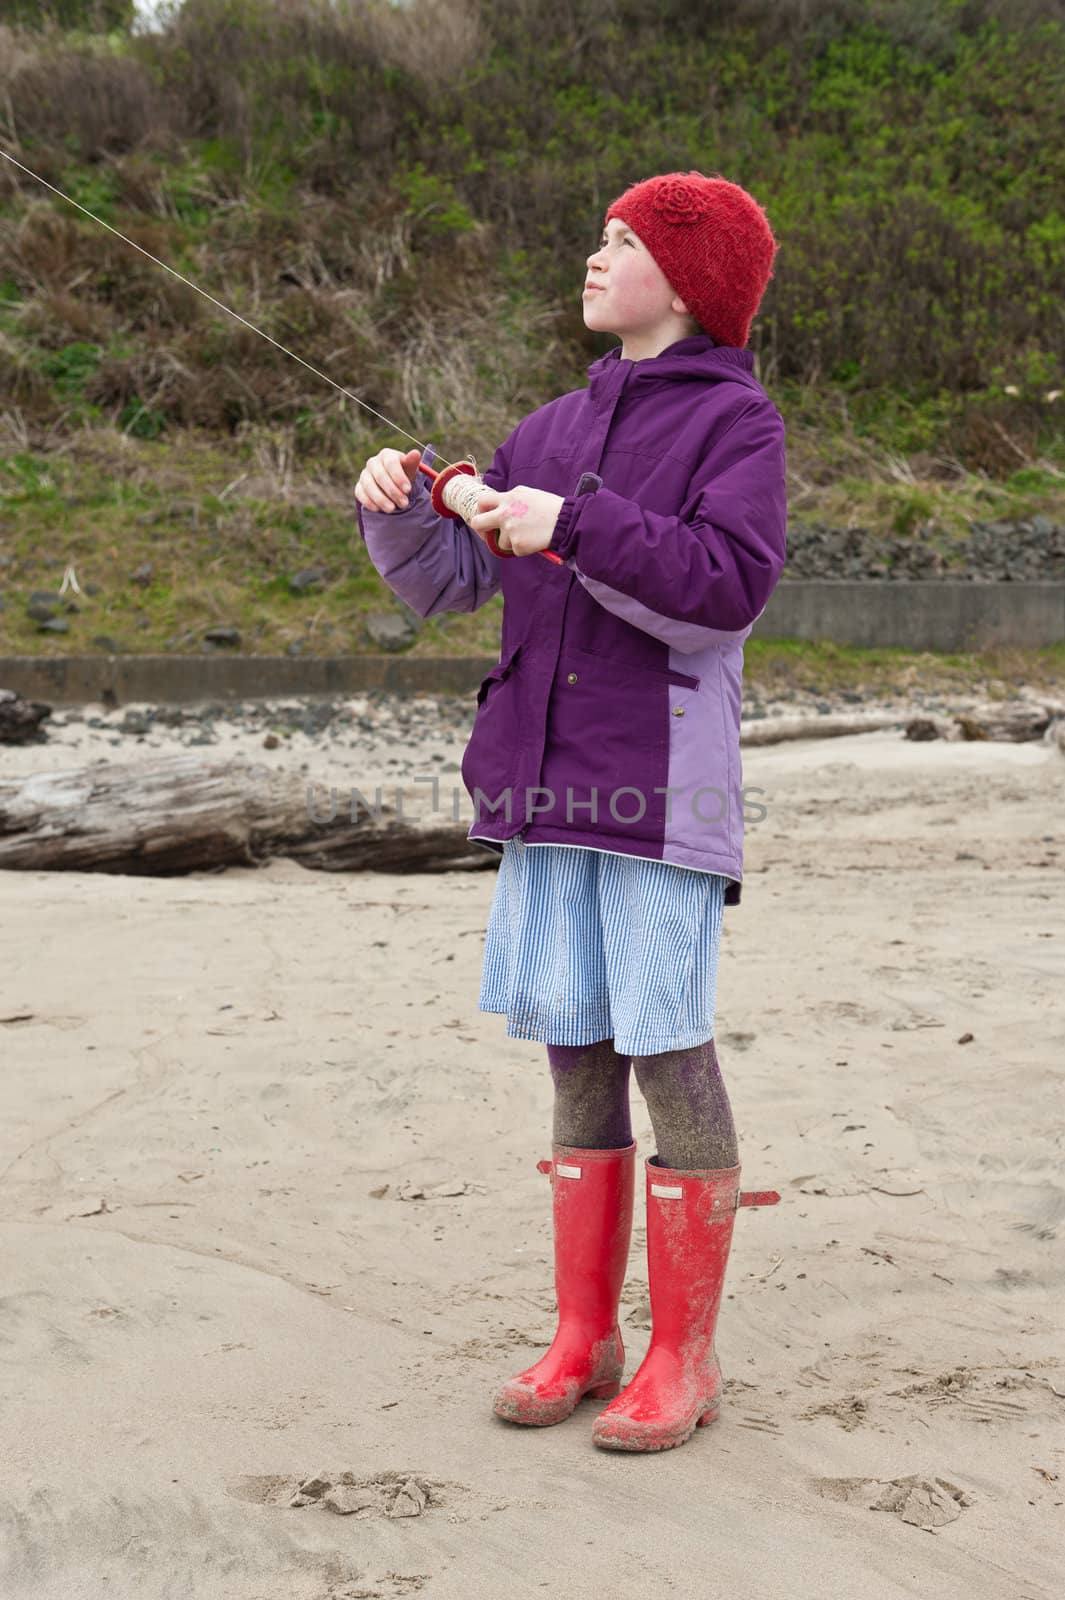 young girl playing kite at beach